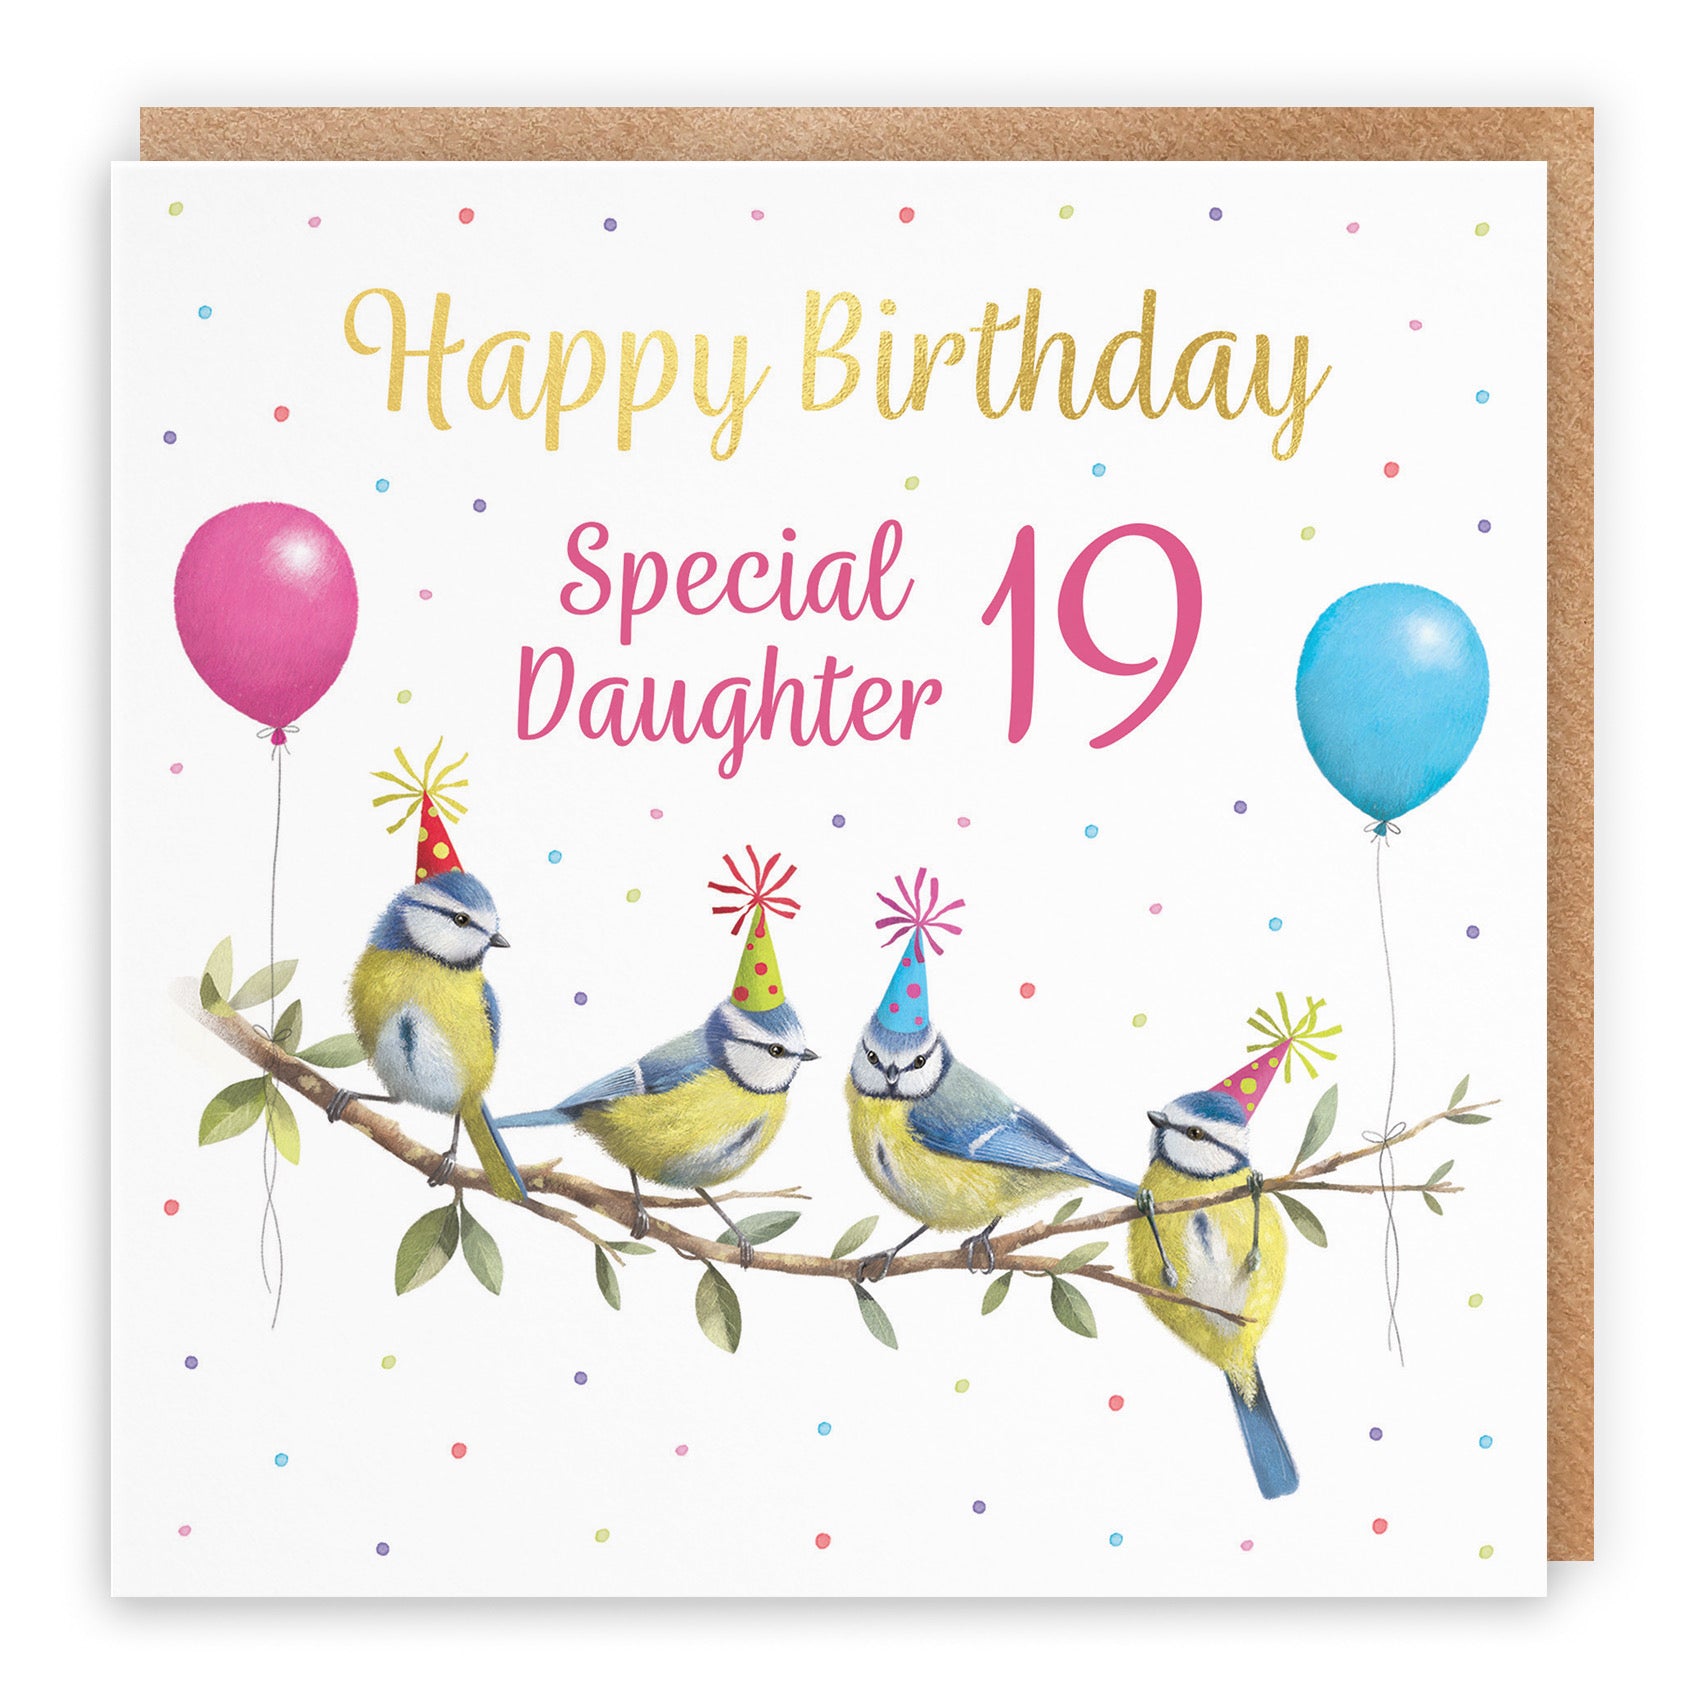 19th Daughter Blue Tits Birthday Card Gold Foil Milo's Gallery - Default Title (B0CV9MH3FG)